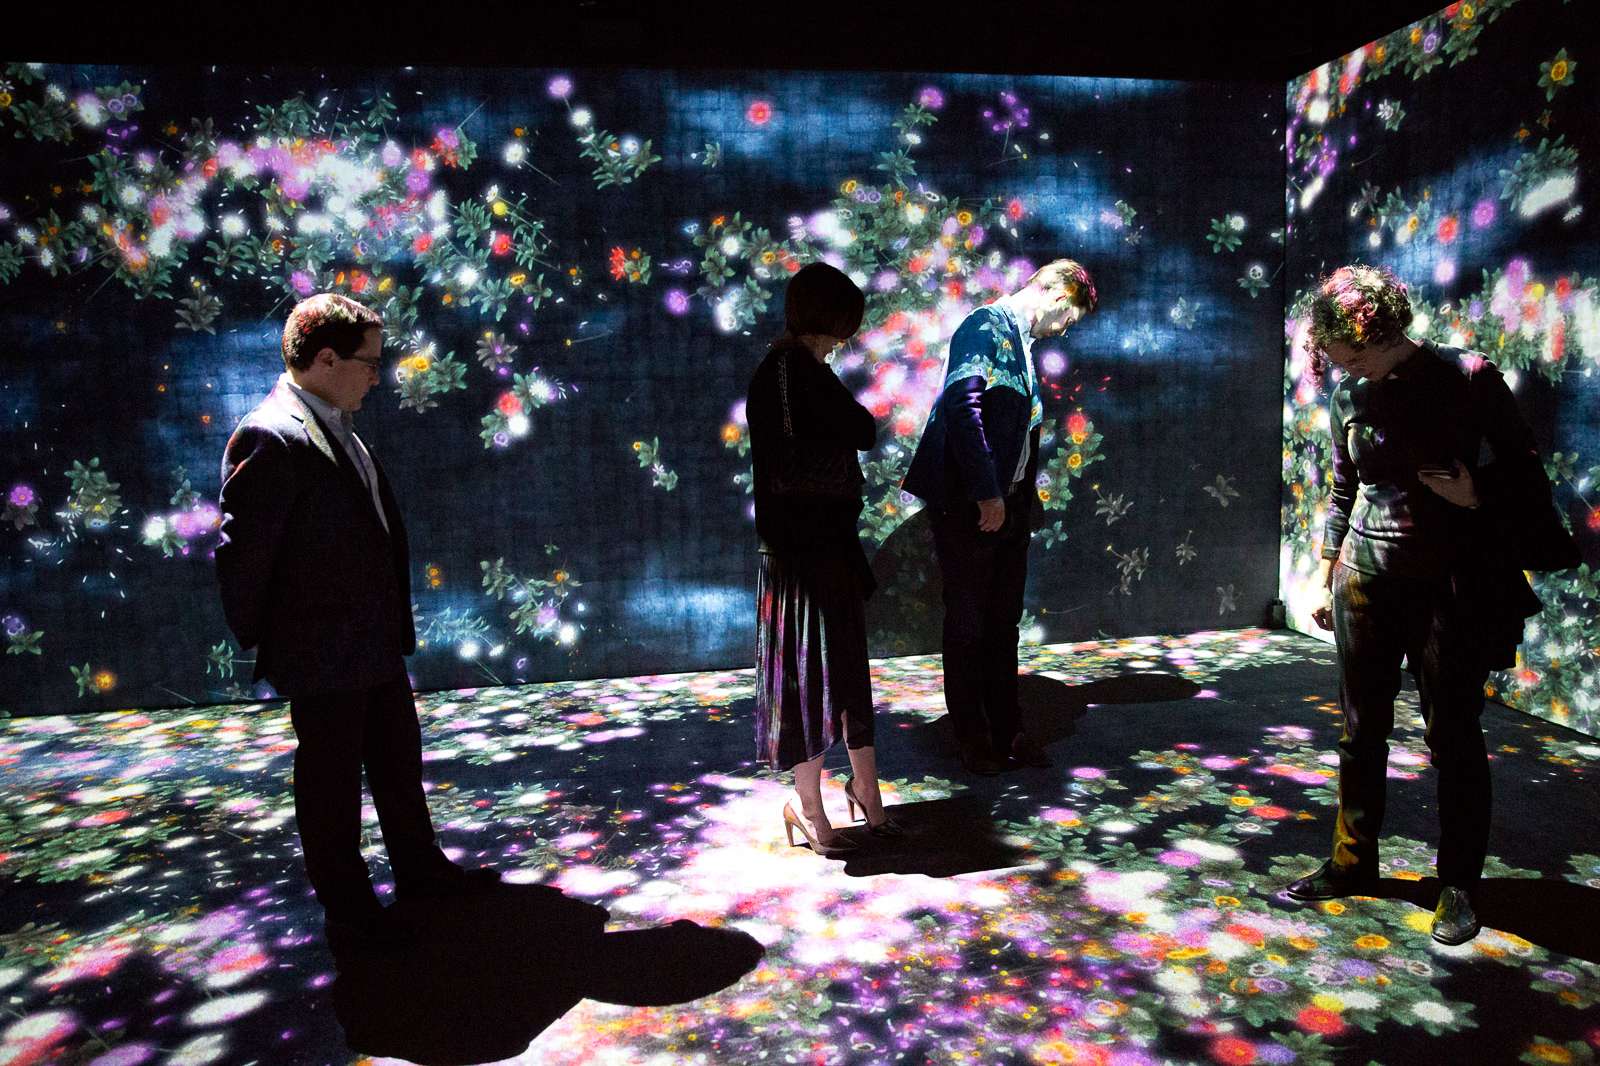 teamLab, Flowers and People, Cannot be Controlled but Live Together – A Whole Year per Hour, 2015. Interactive Digital Installation, Endless, Sound: Hideaki Takahashi. Installation photo at the Moody Center for the Arts, 2017. Photo: Jenny Antill